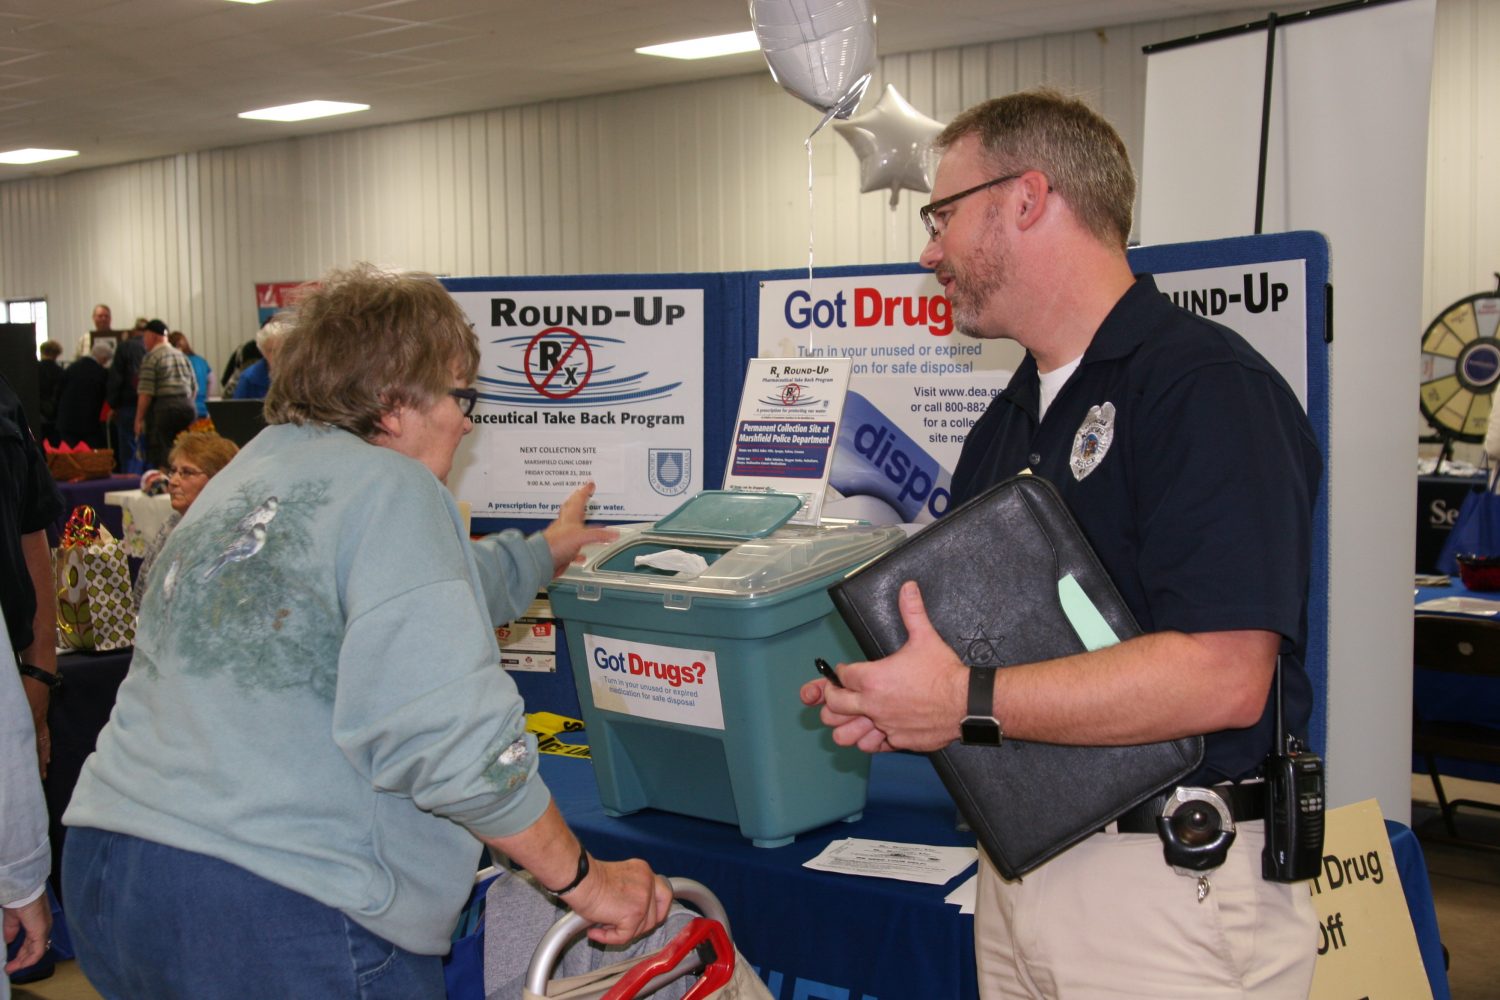 Marshfield Police Department Lieutenant Darren Larson receives unused and expired medicine from Mary Bass. The take back station is just one of three scheduled prescription take back events in Marshfield. Upcoming events will be held Friday, Oct. 21, at the Marshfield Clinic and Saturday, Oct. 22, at Shopko. Hub City Times staff photo.